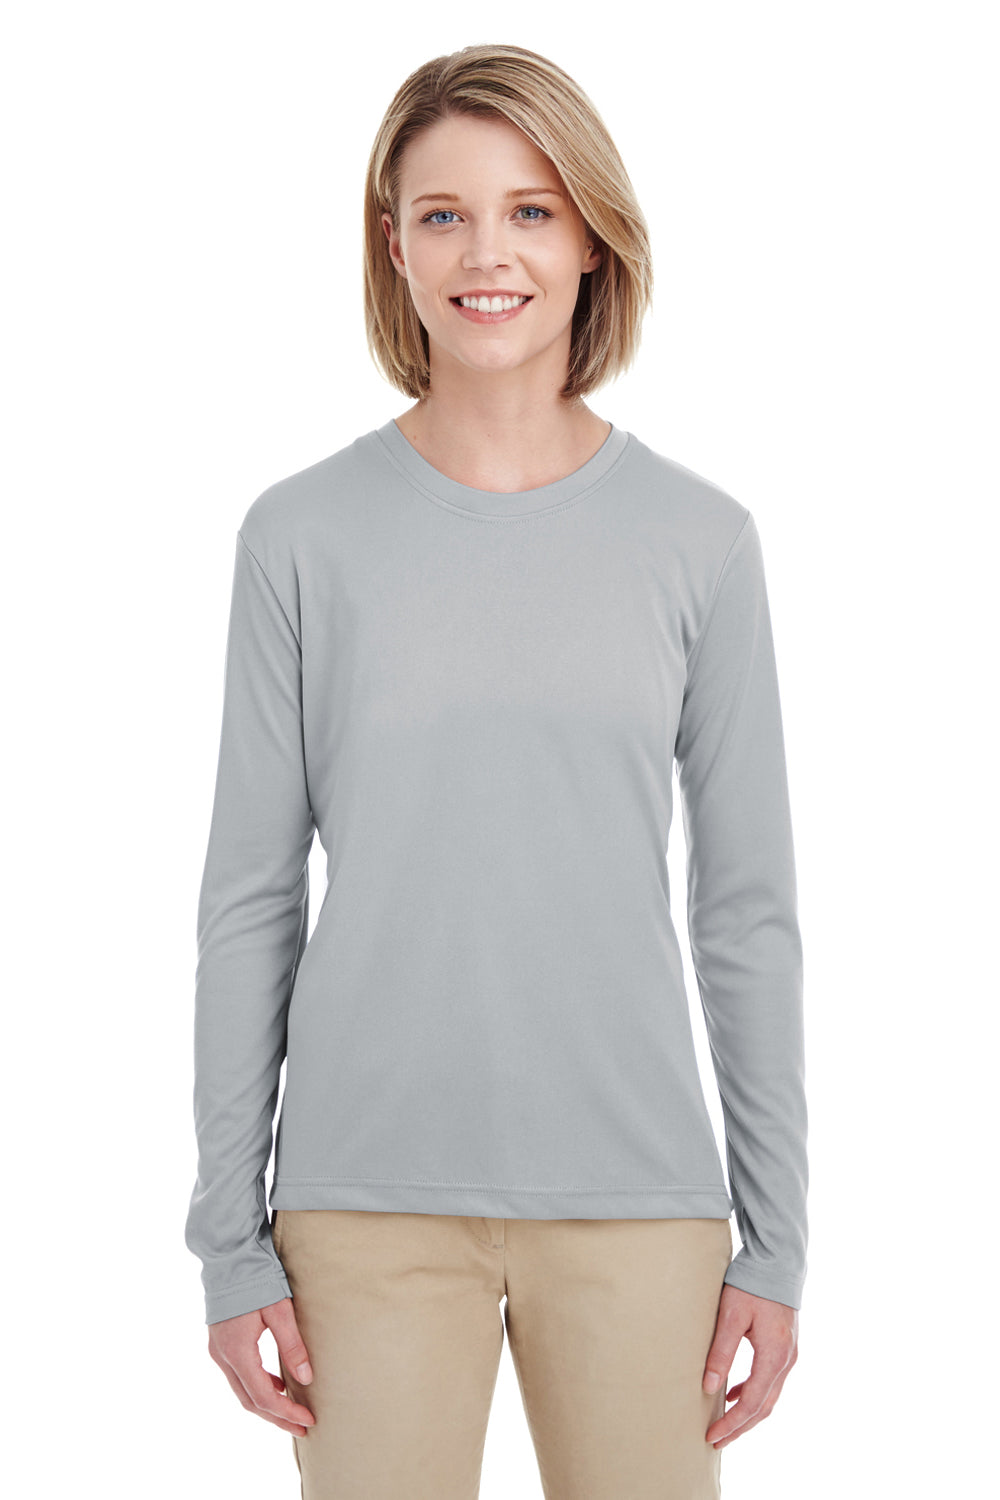 UltraClub 8622W Womens Cool & Dry Performance Moisture Wicking Long Sleeve Crewneck T-Shirt Grey Front